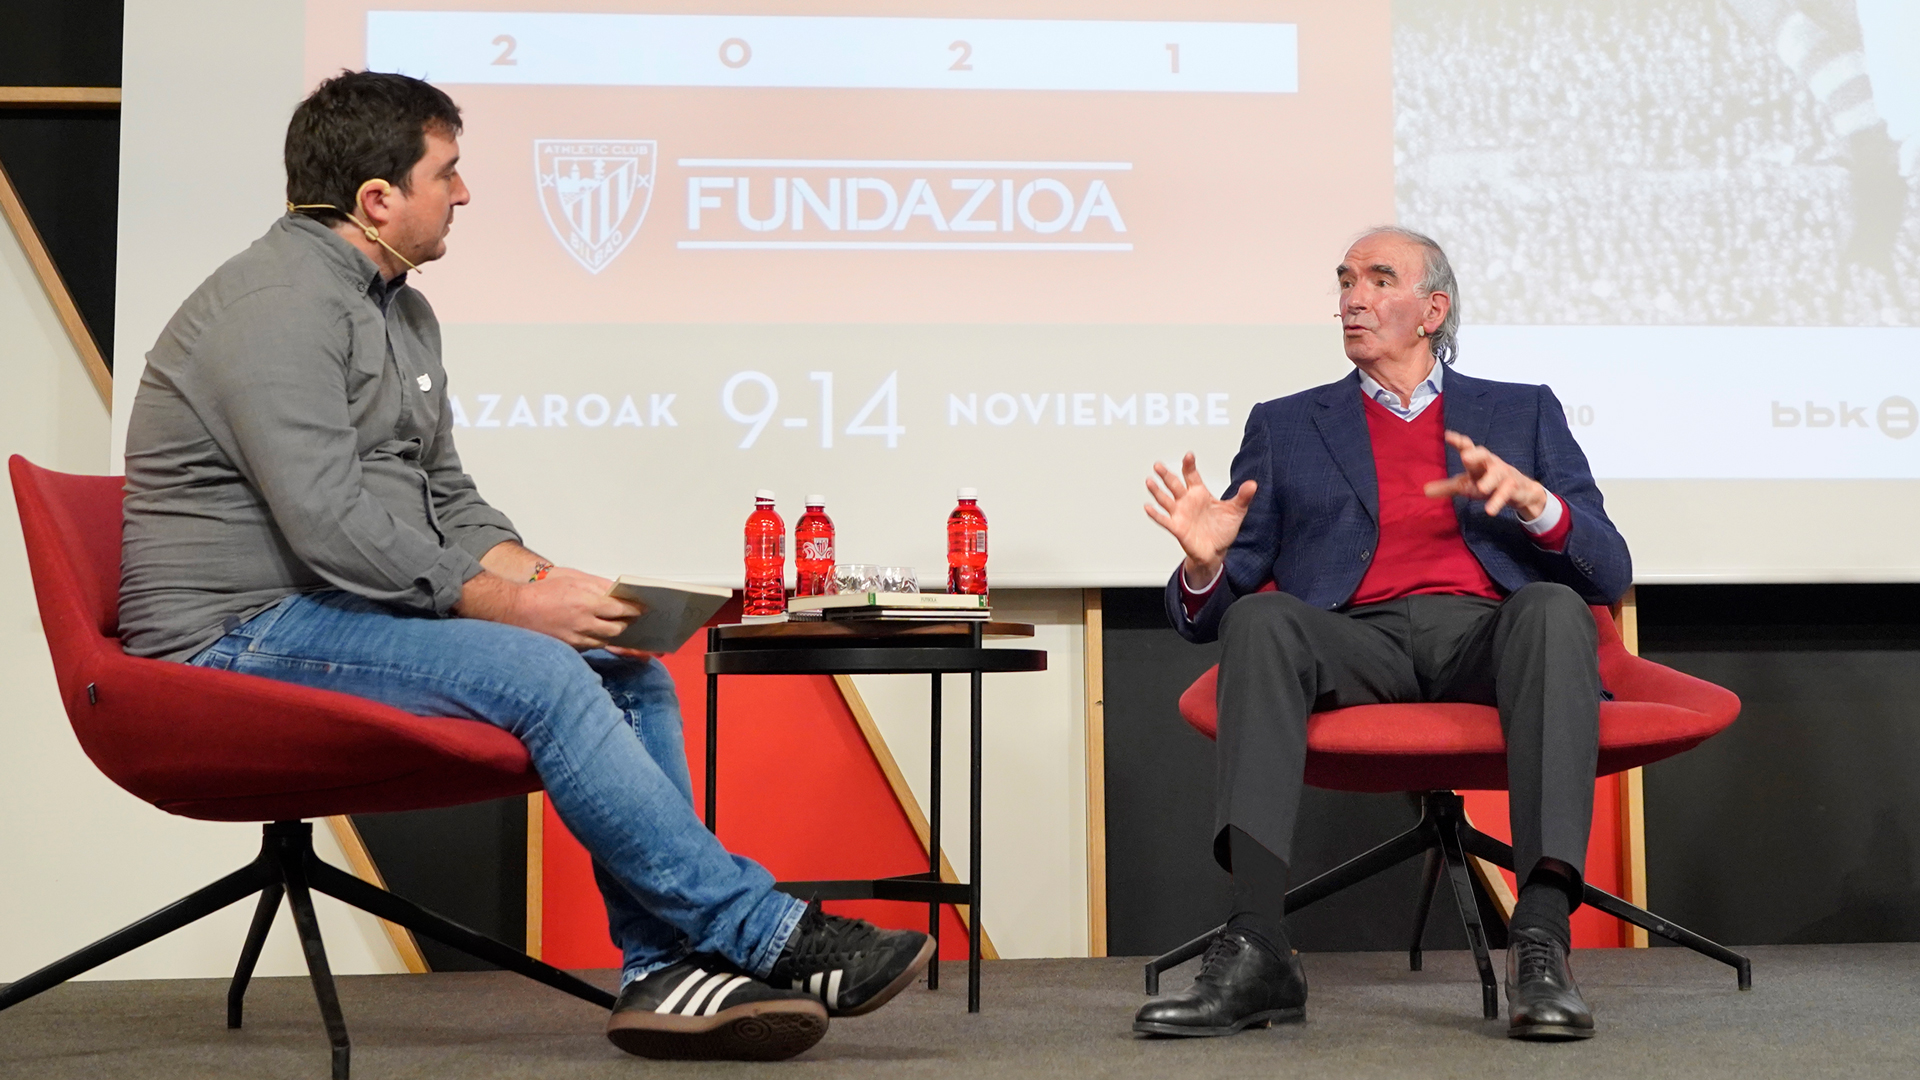 Iribar: “We’re still playing the game when it comes to Basque”